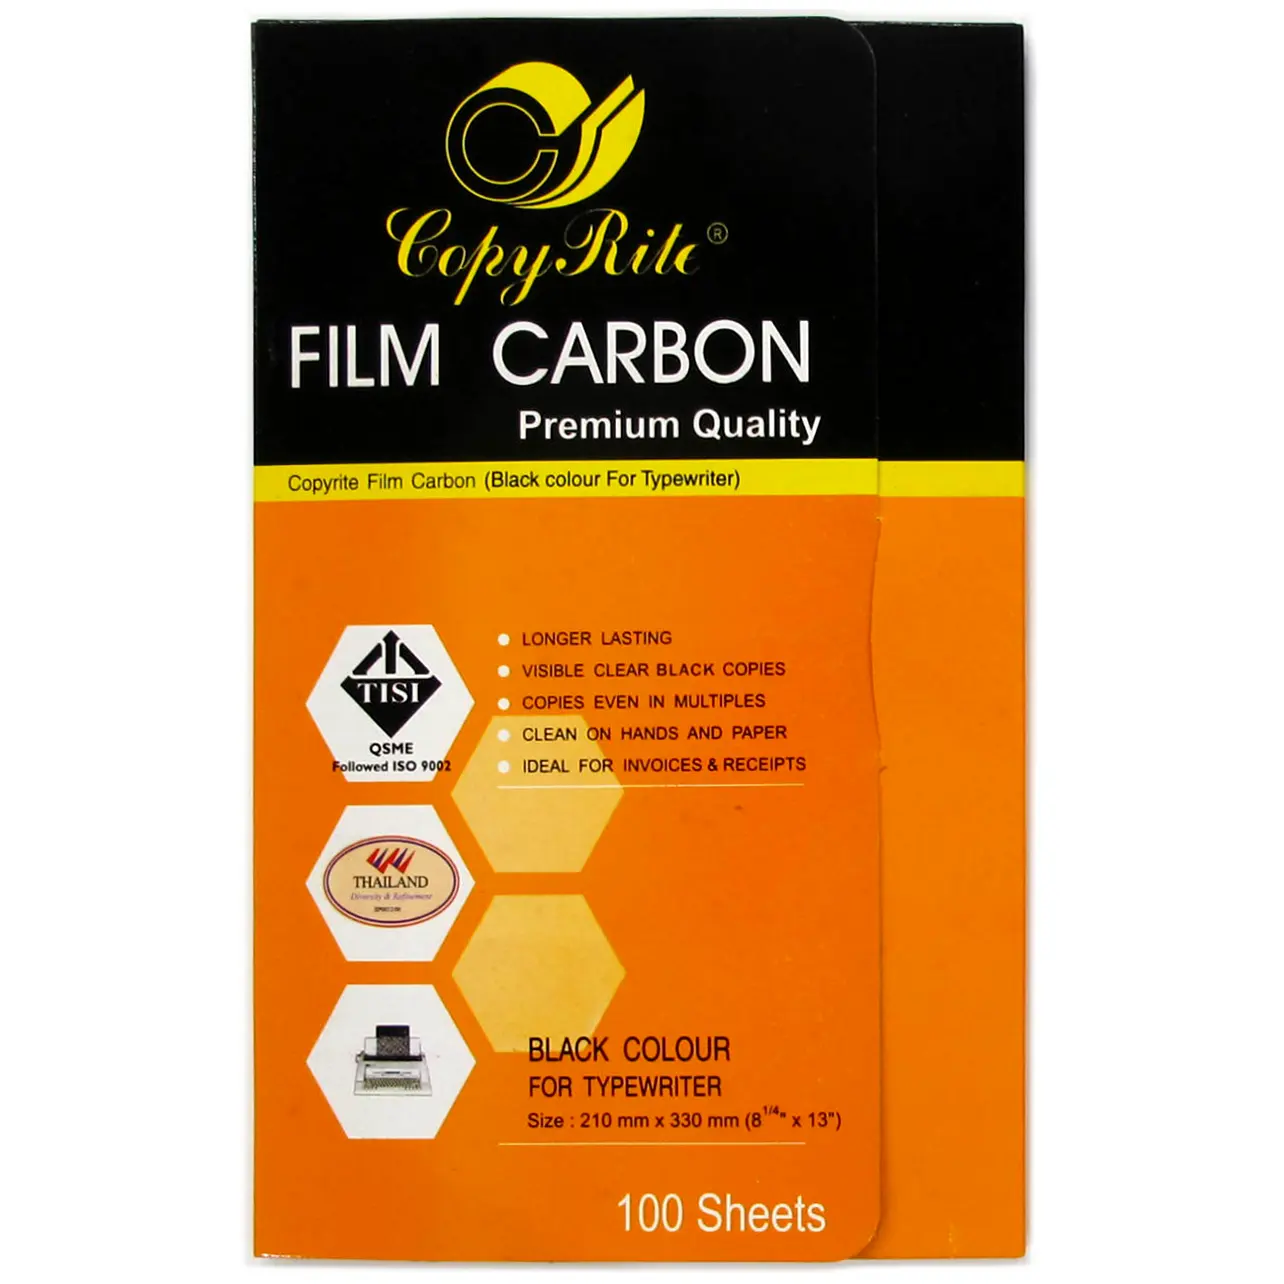 Film Carbon - Black Color From Thailand for Invoices and Documents with Clear and Sharp Copies